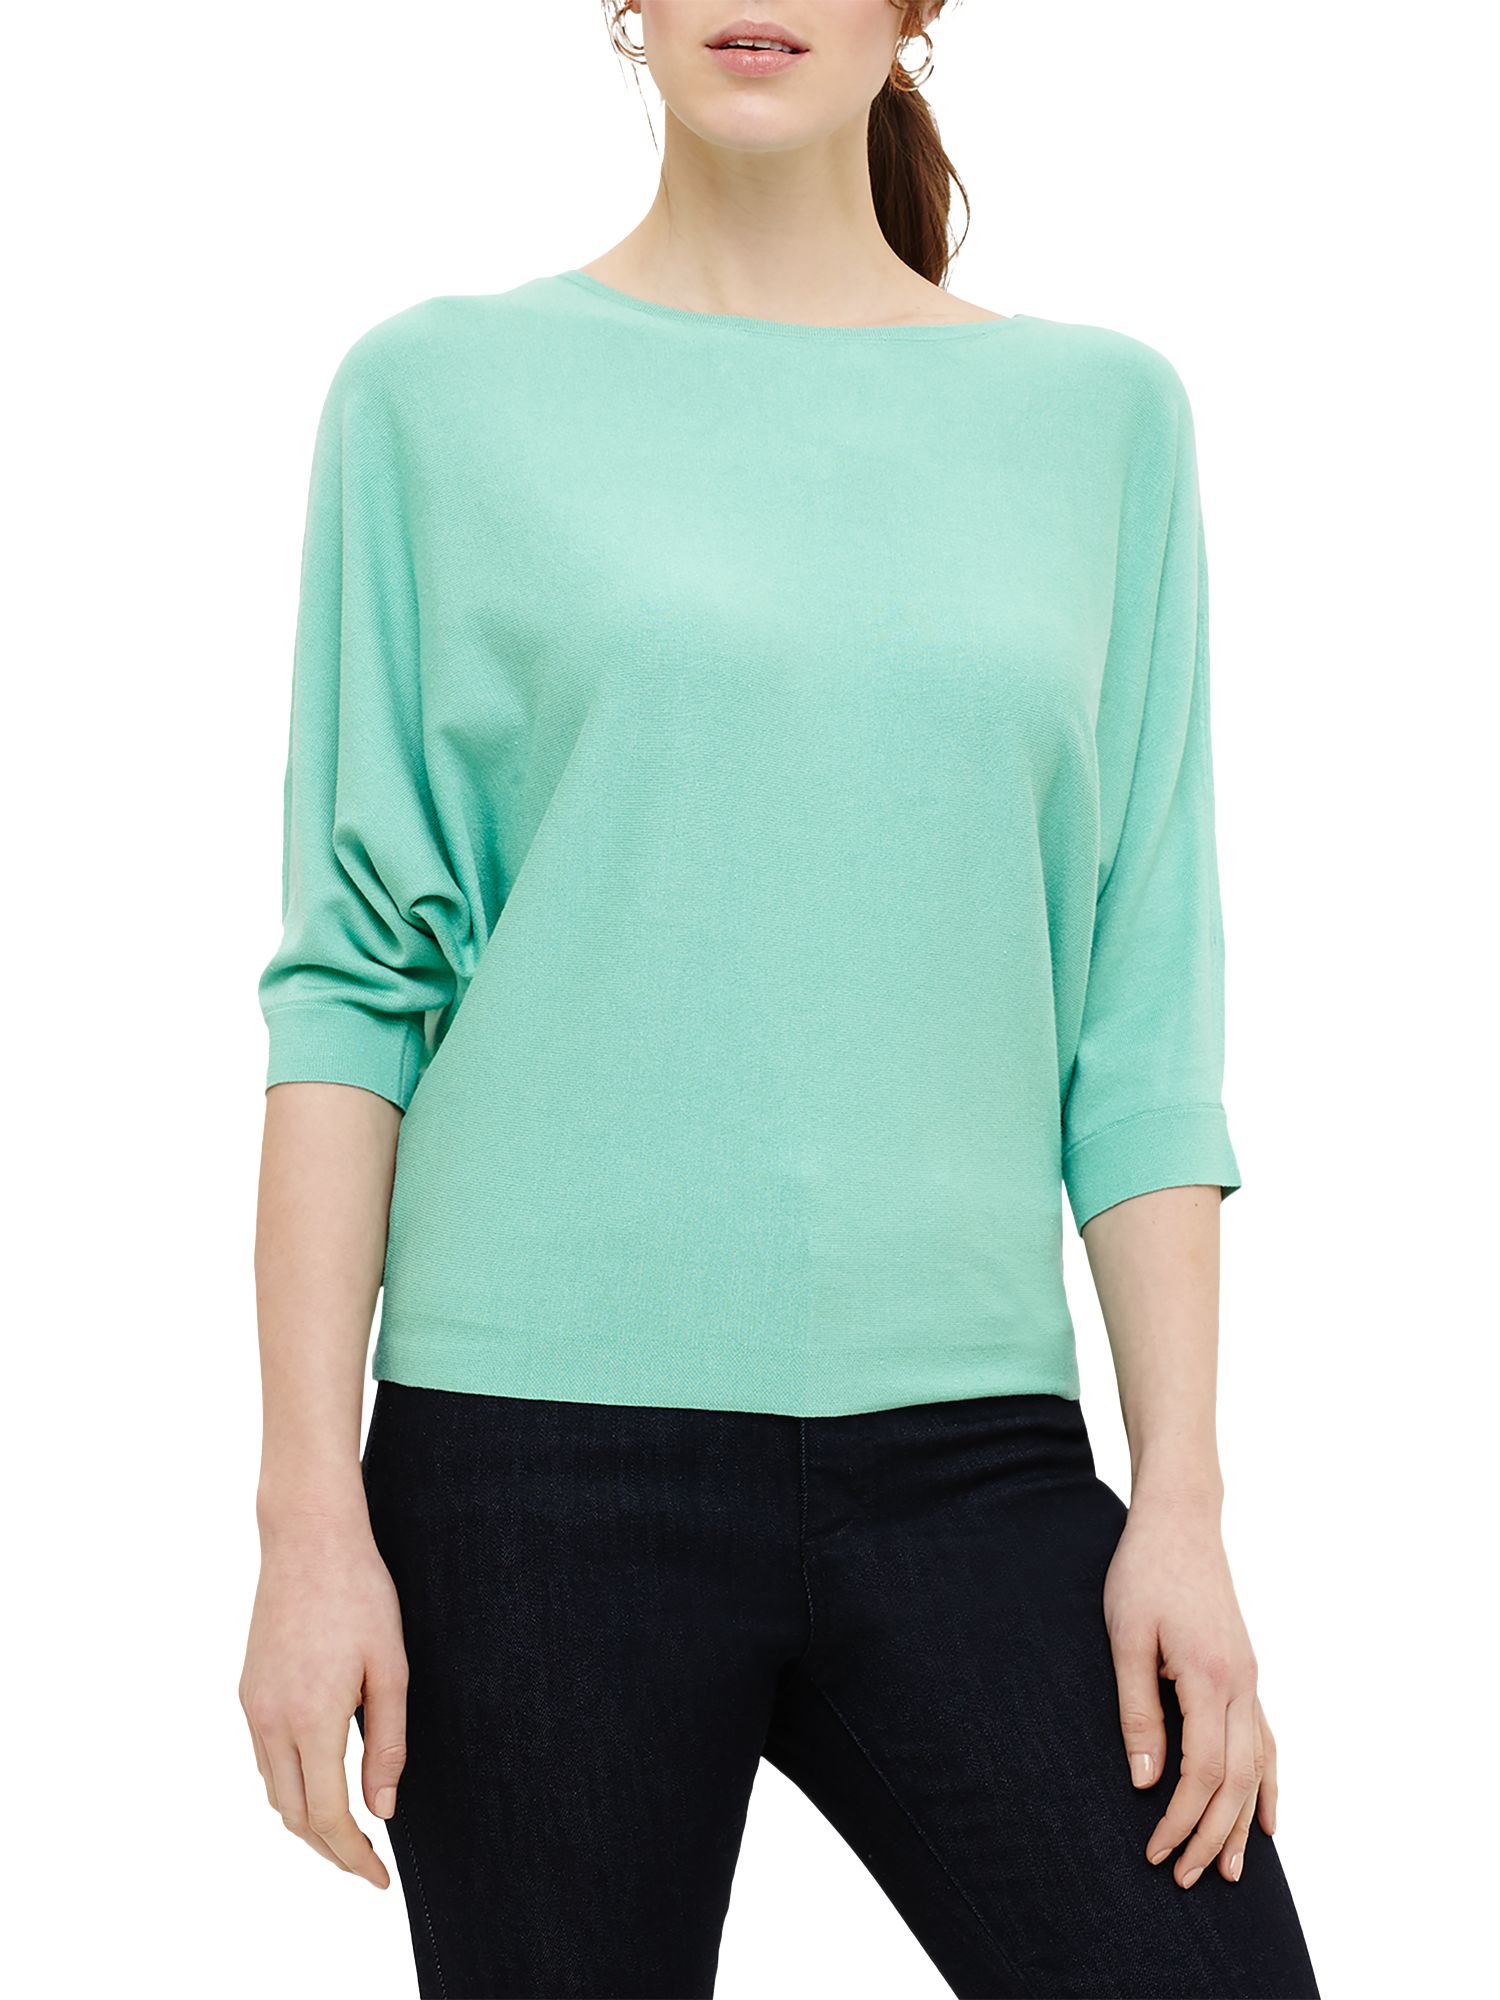 Phase Eight Cristine Batwing Jumper, Melon, S